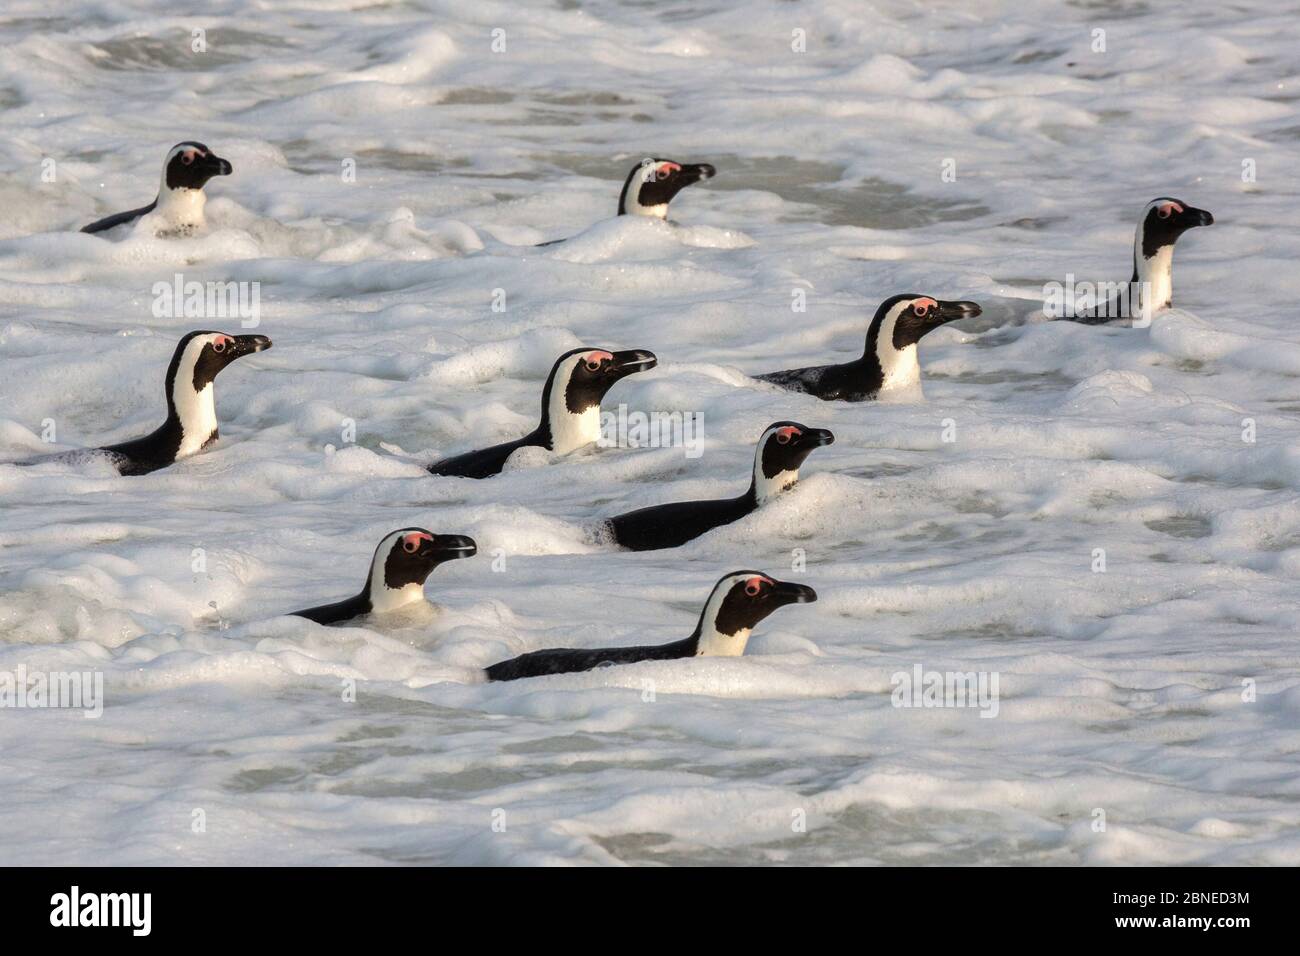 African penguins (Spheniscus demersus) in the surf swimming off Foxy Beach, Table Mountain National Park, Simon's Town, Cape Town, South Africa, Stock Photo